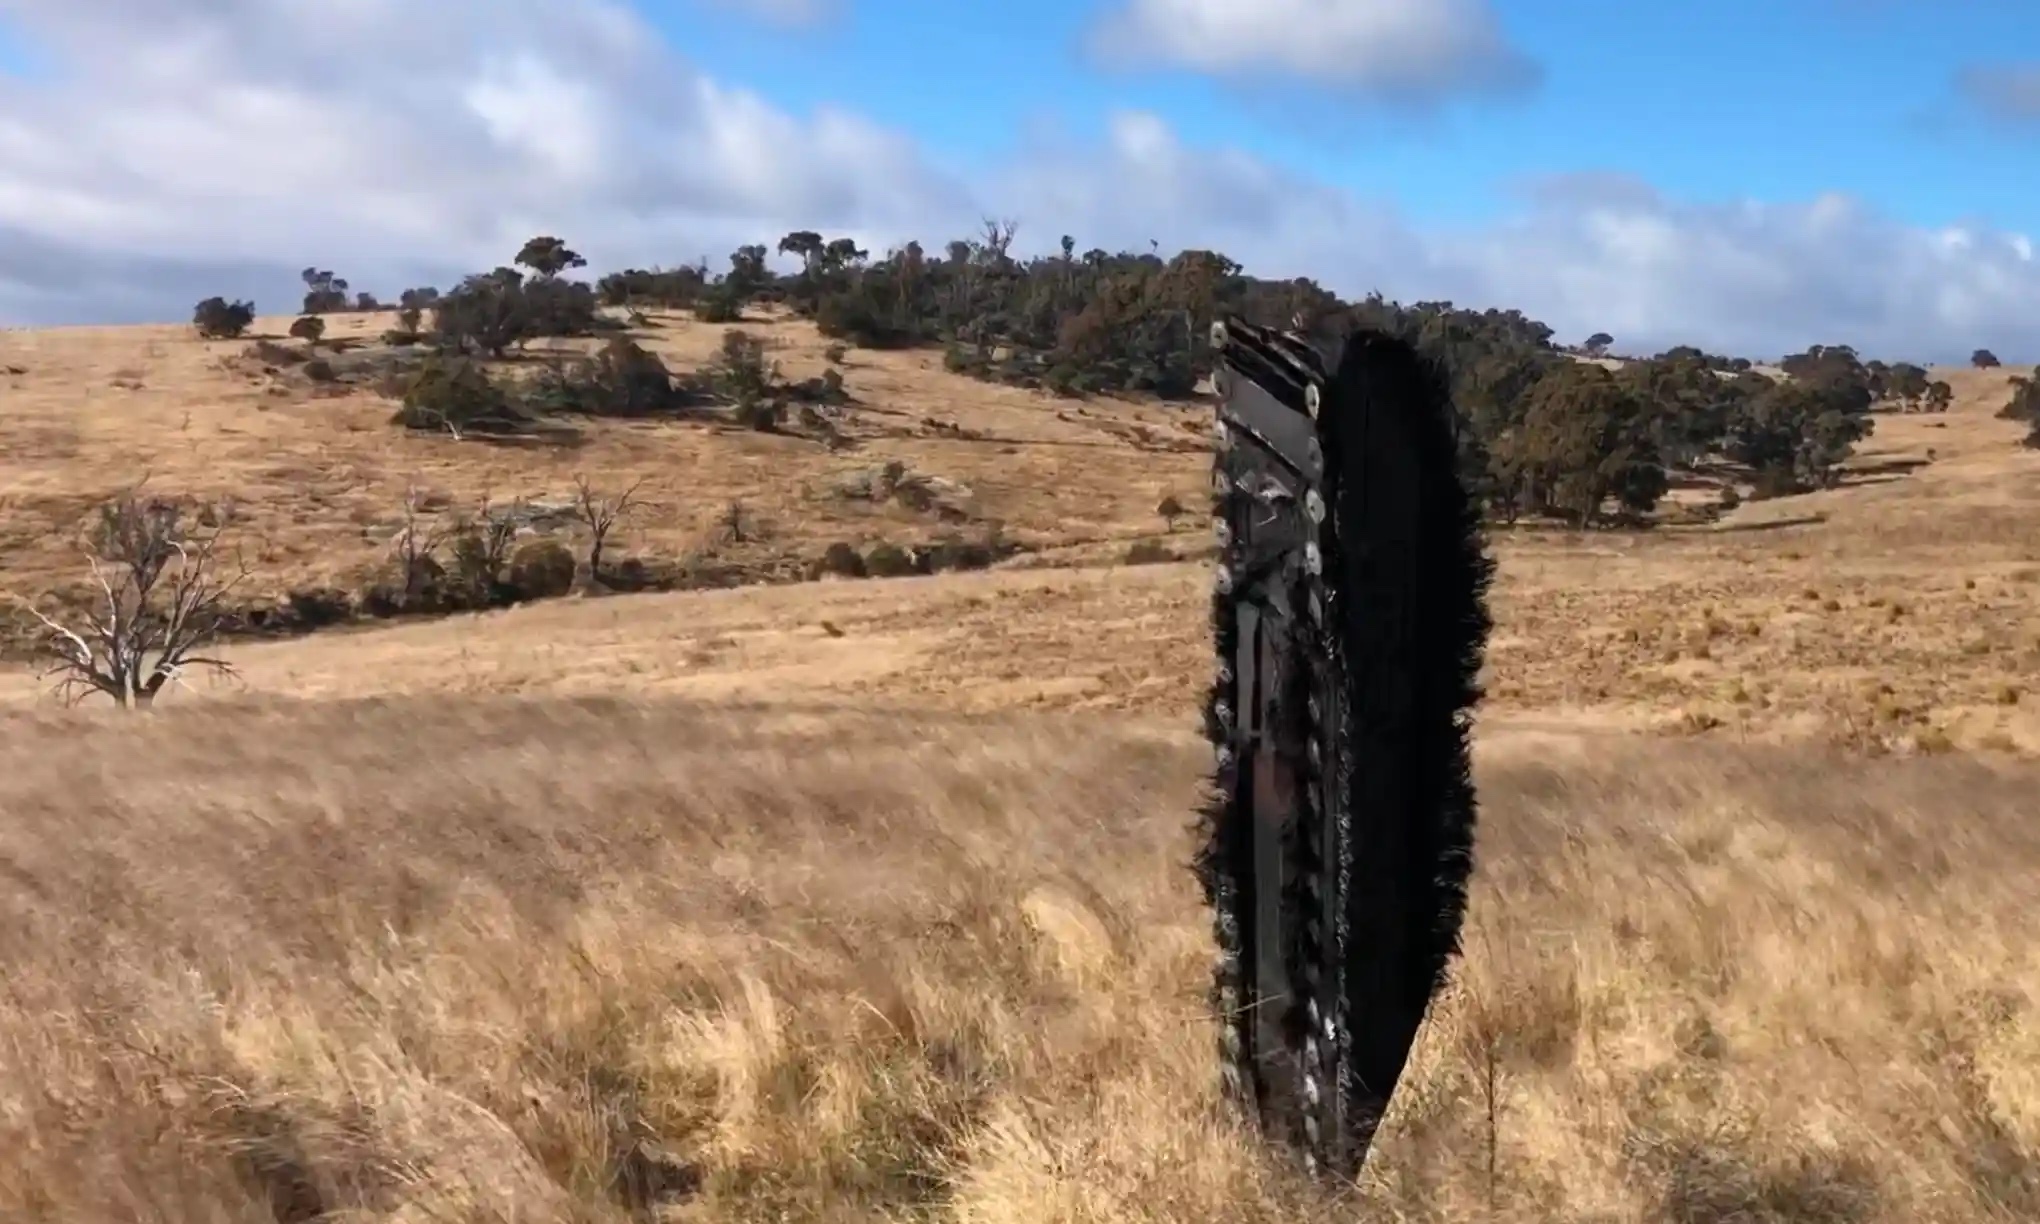 A piece of space debris sticking out the ground in Dalgety, NSW